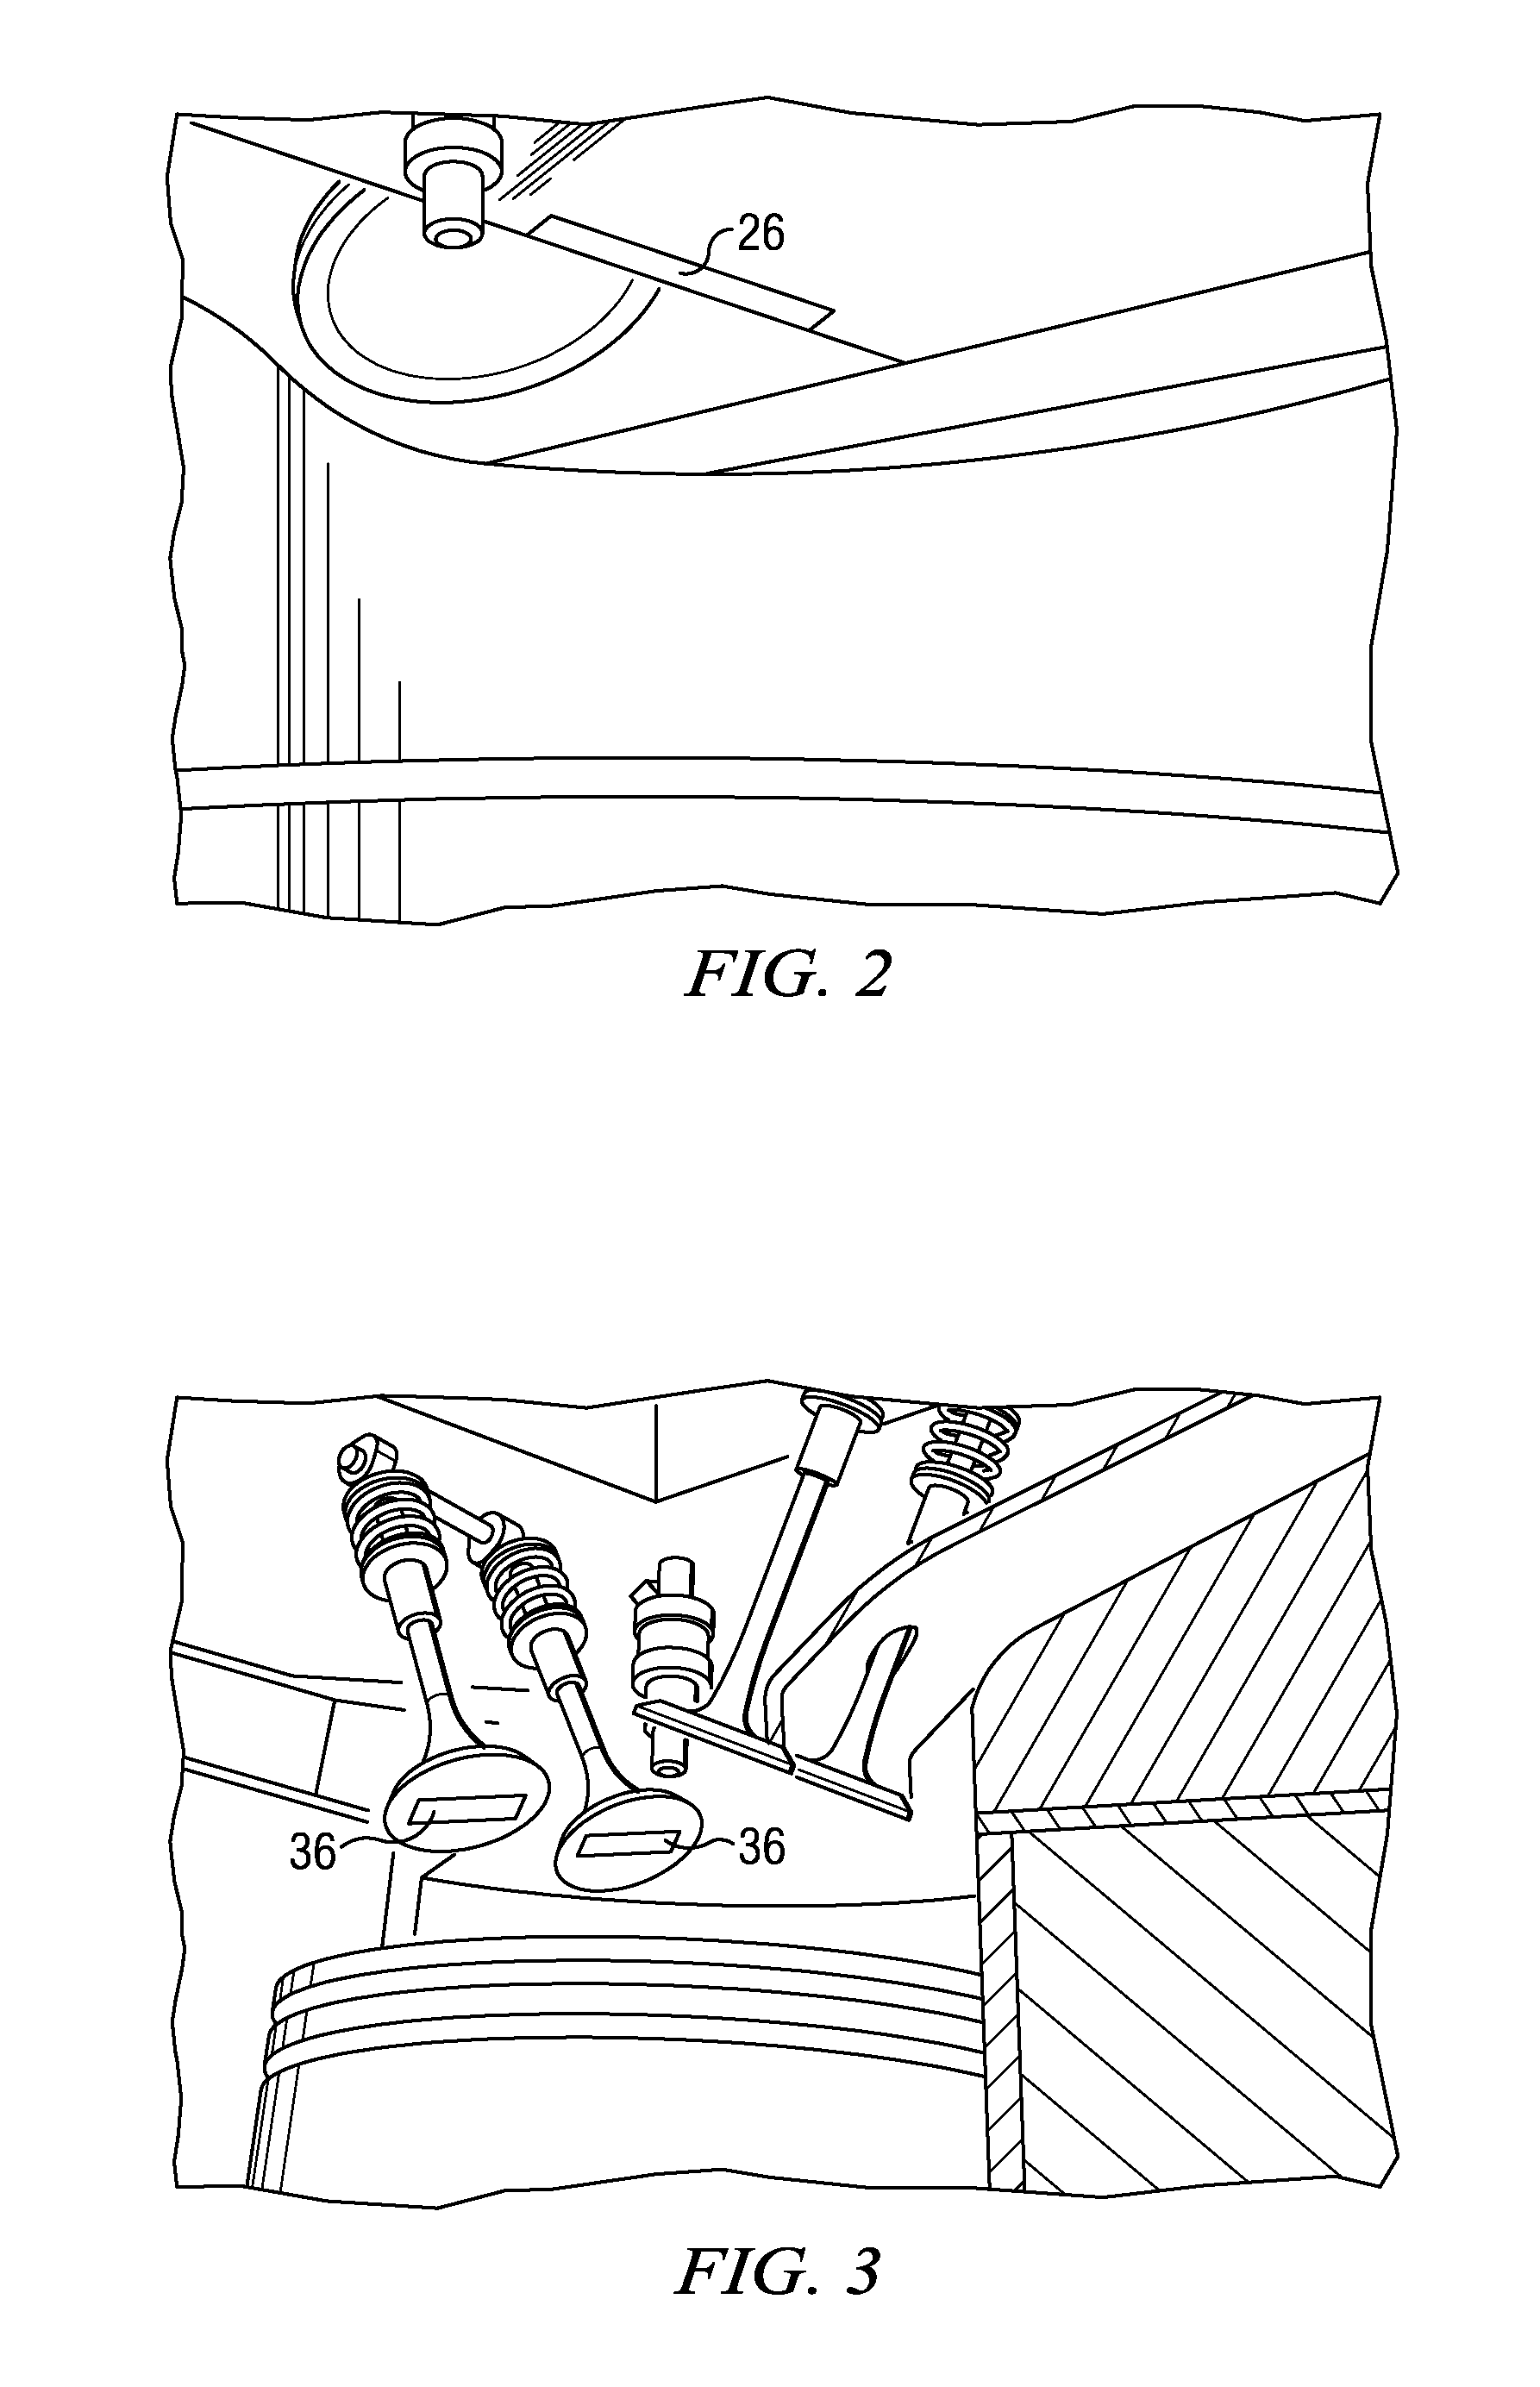 Enhanced Combustion for Compression Ignition Engine Using Electromagnetic Energy Coupling